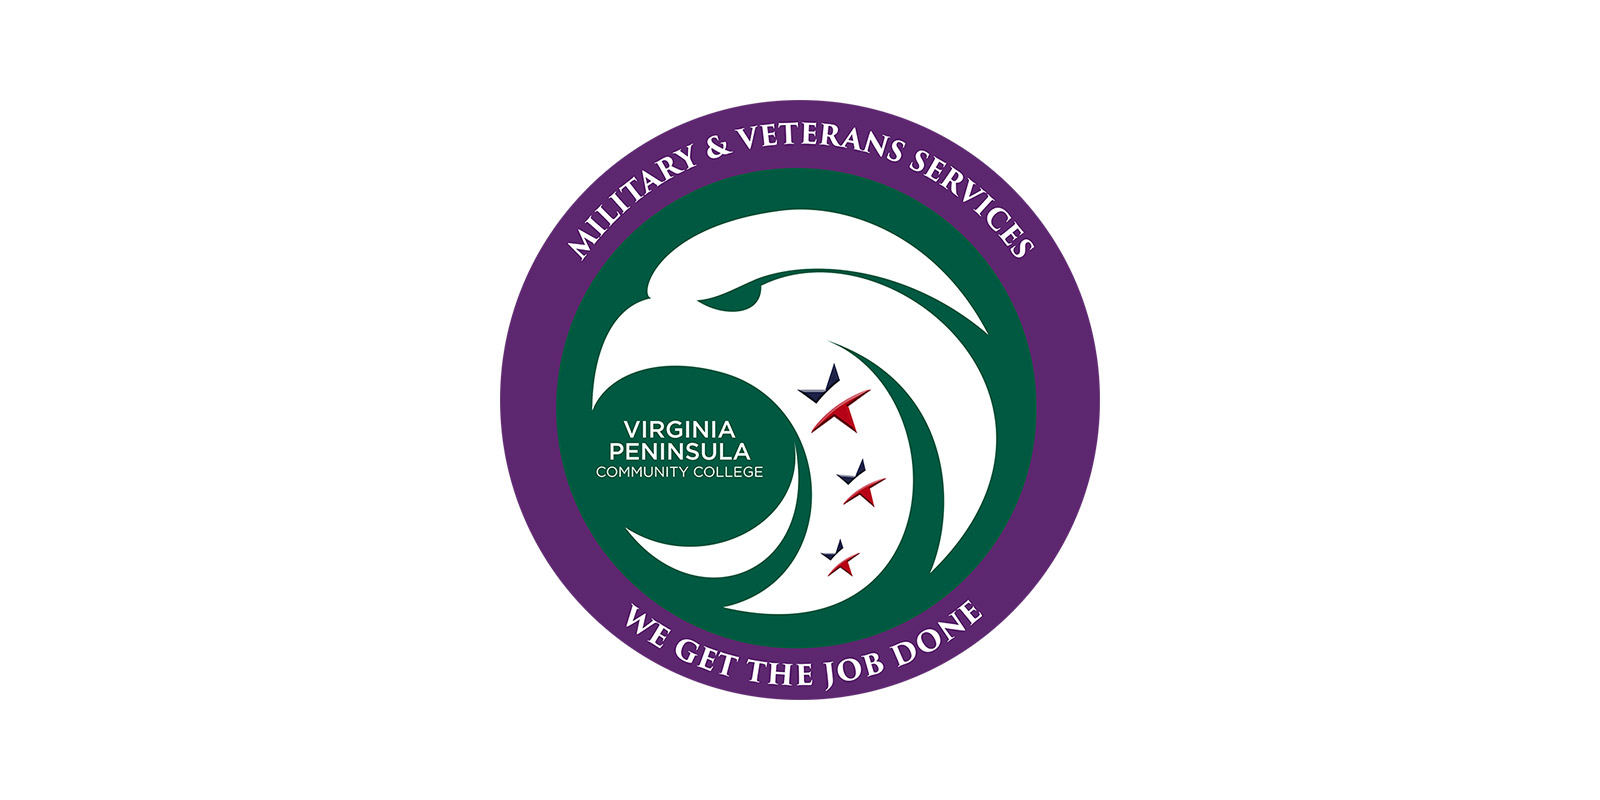 Military and Veterans services logo